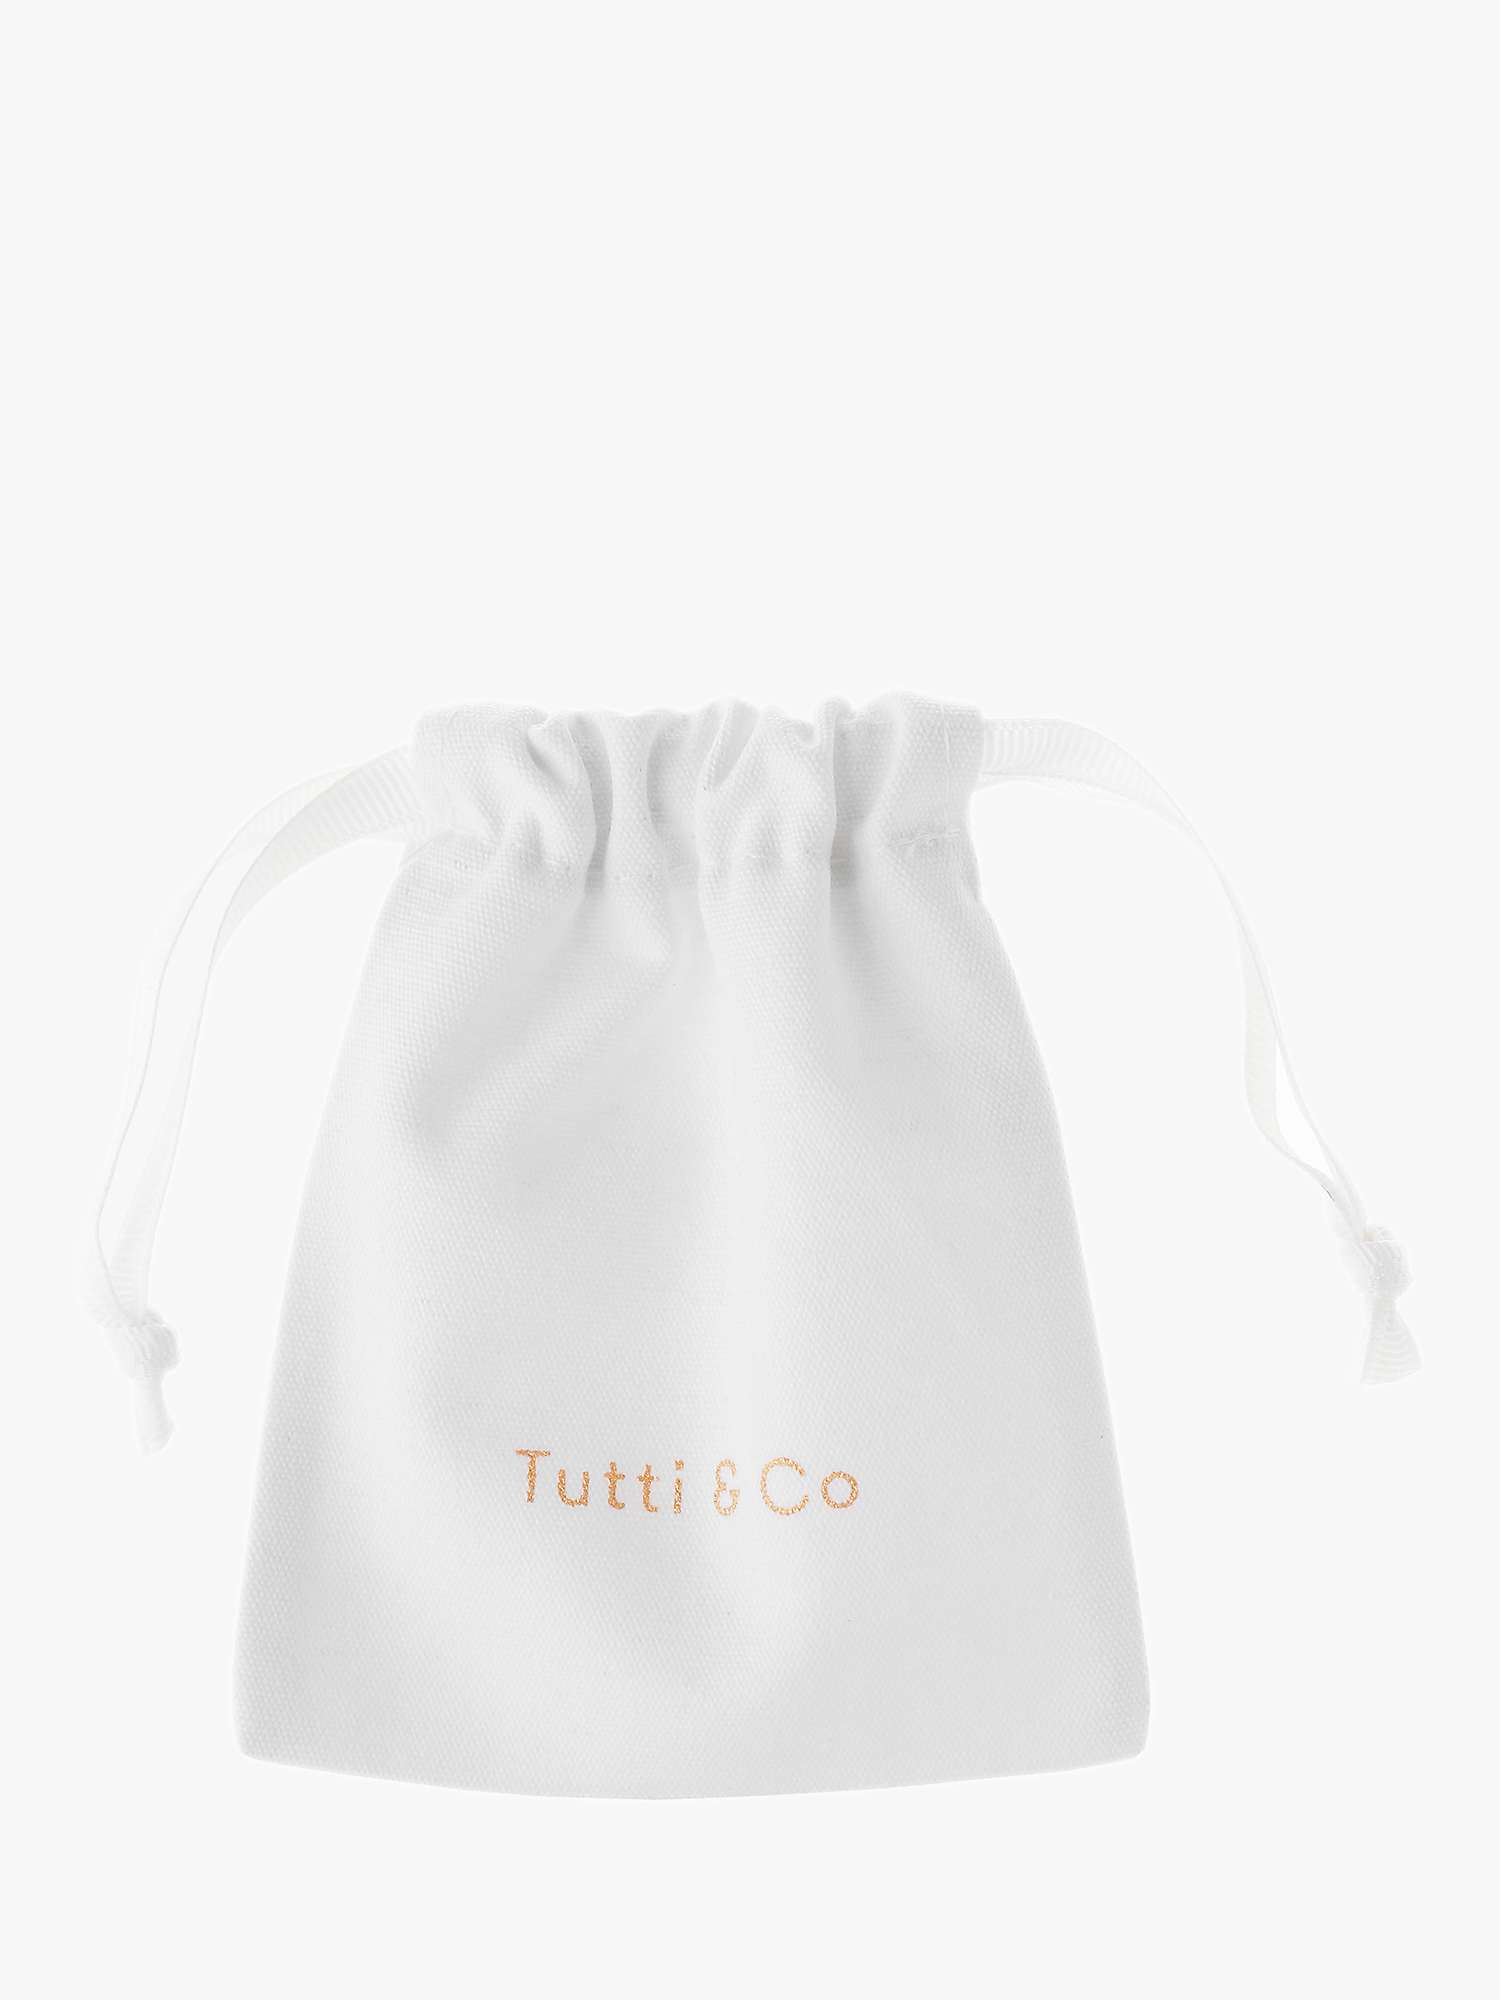 Buy Tutti & Co Softly Twisted Pendant Necklace Online at johnlewis.com